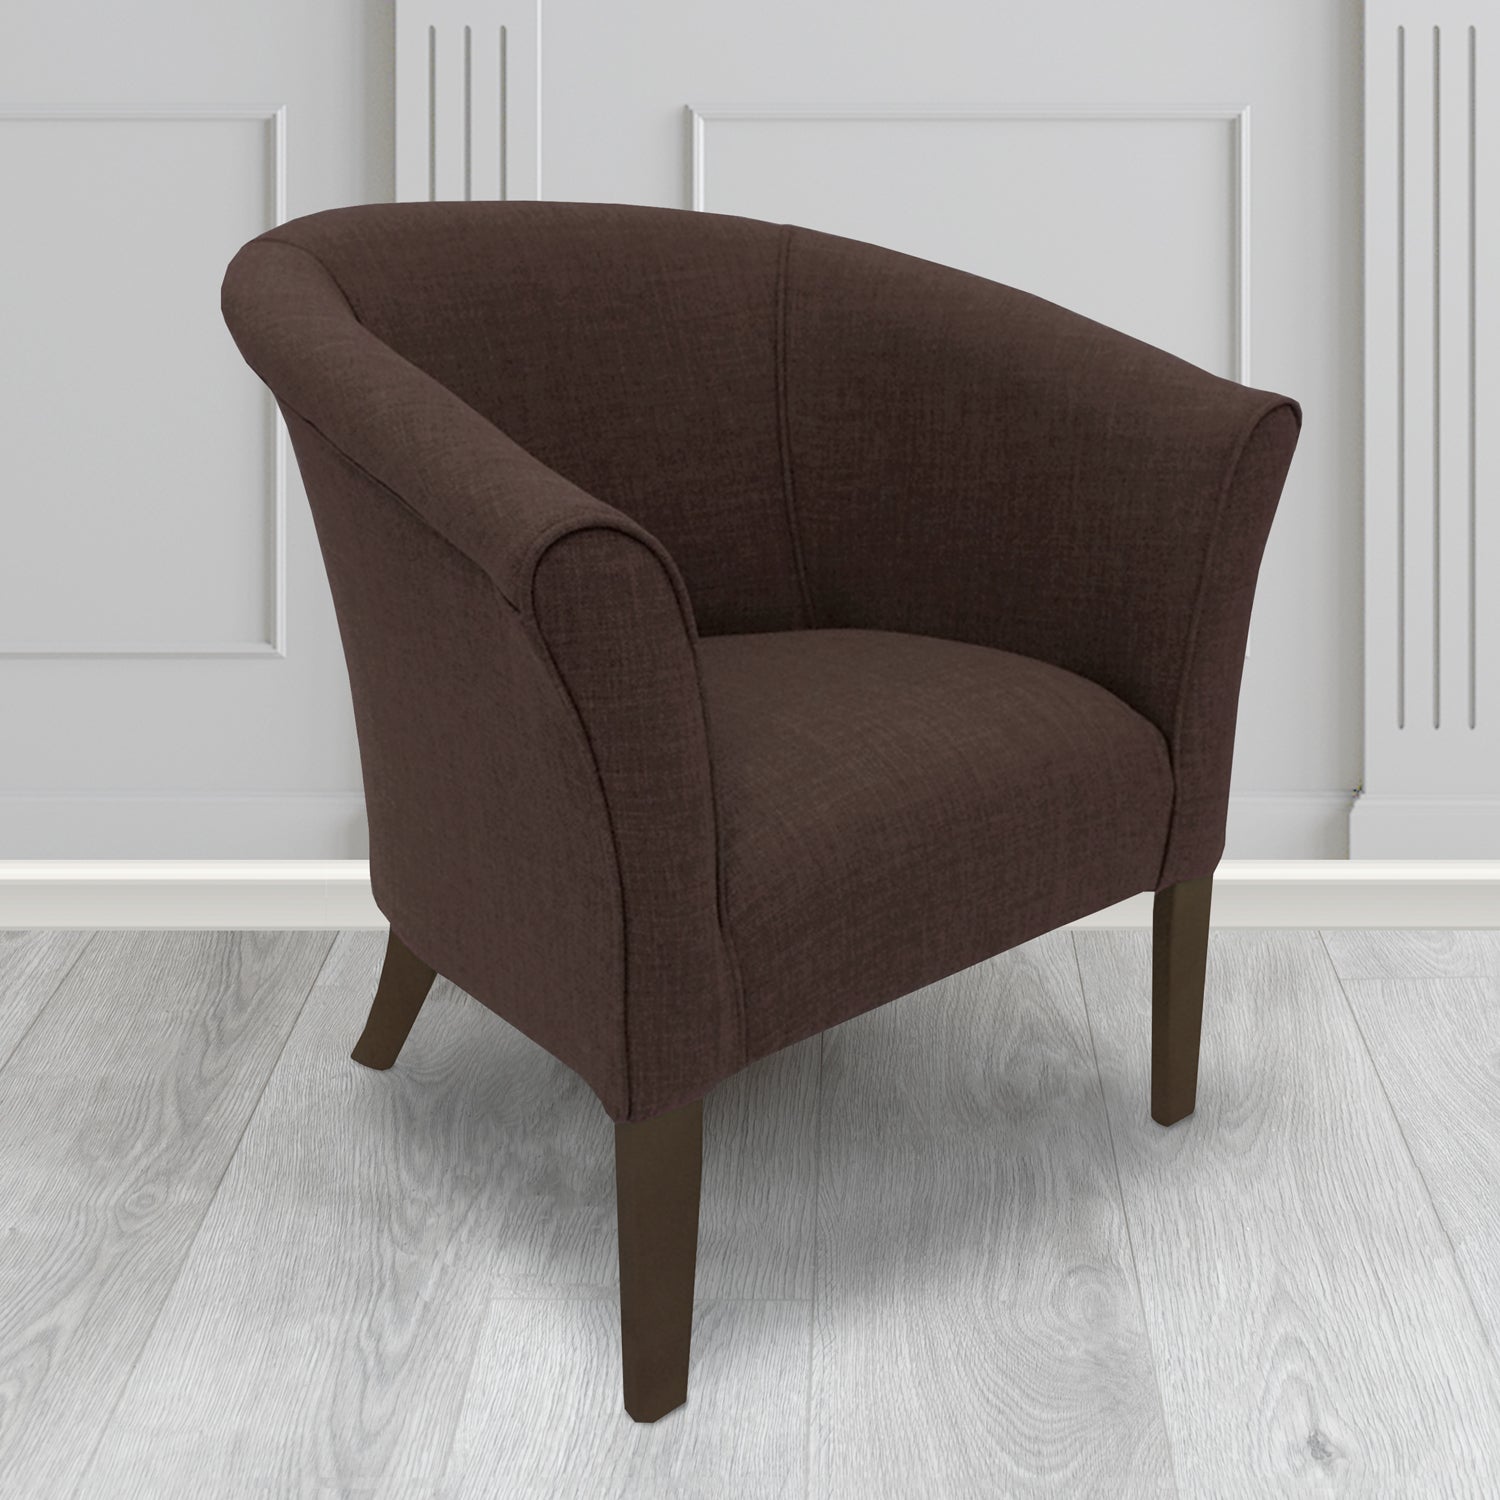 Quill Tub Chair in Linetta Chocolate Crib 5 Plain Fabric - Antimicrobial, Stain Resistant & Waterproof - The Tub Chair Shop